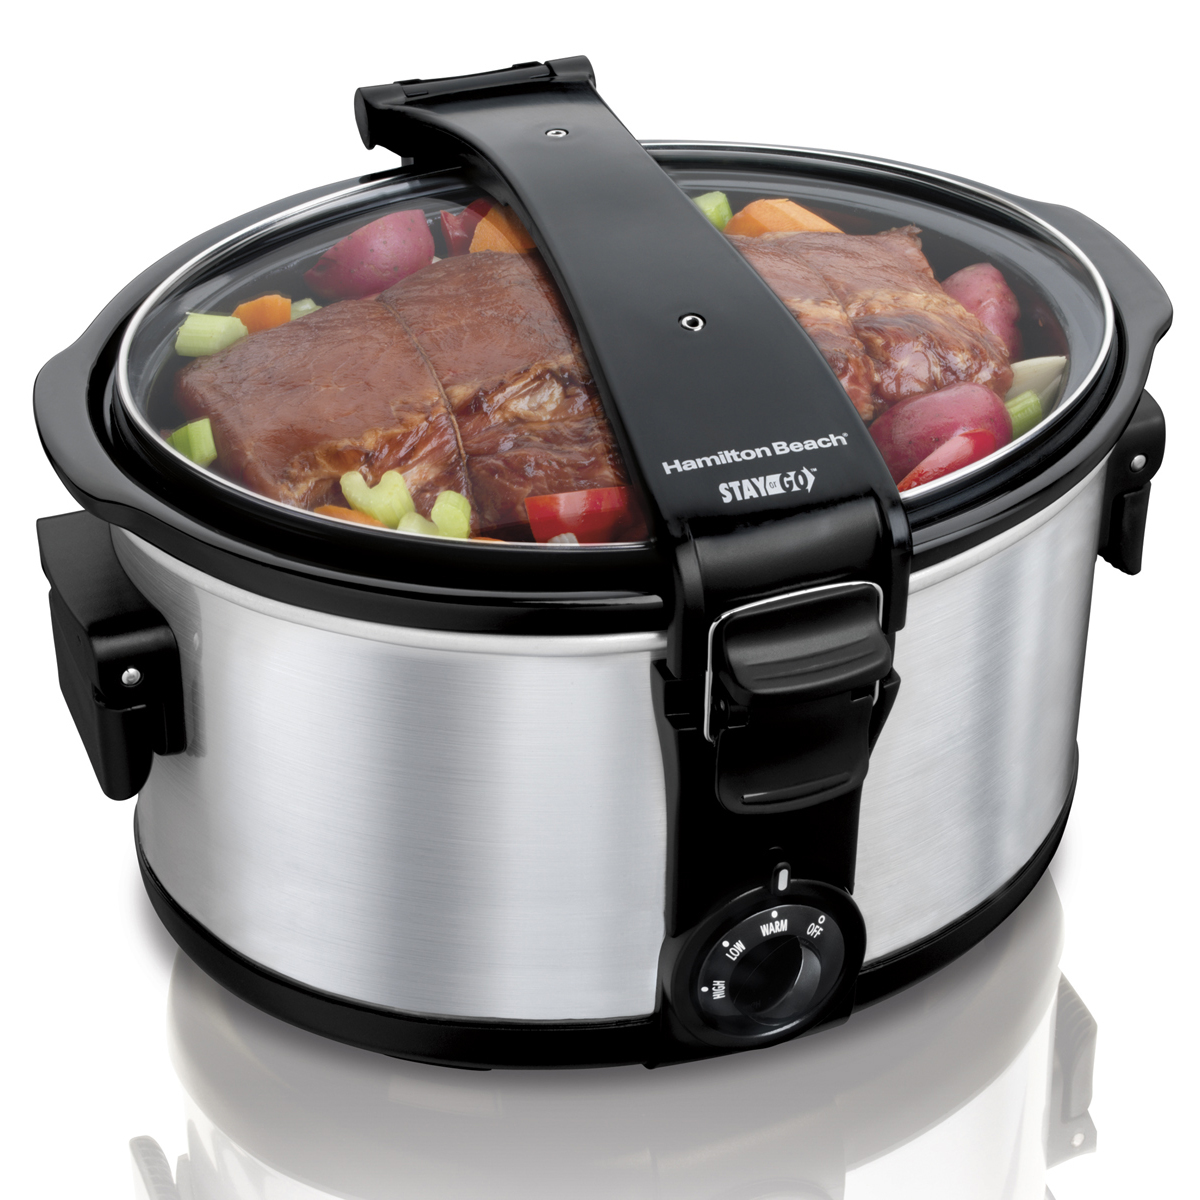 Stay or Go® 7 Quart Portable Slow Cooker (33472)